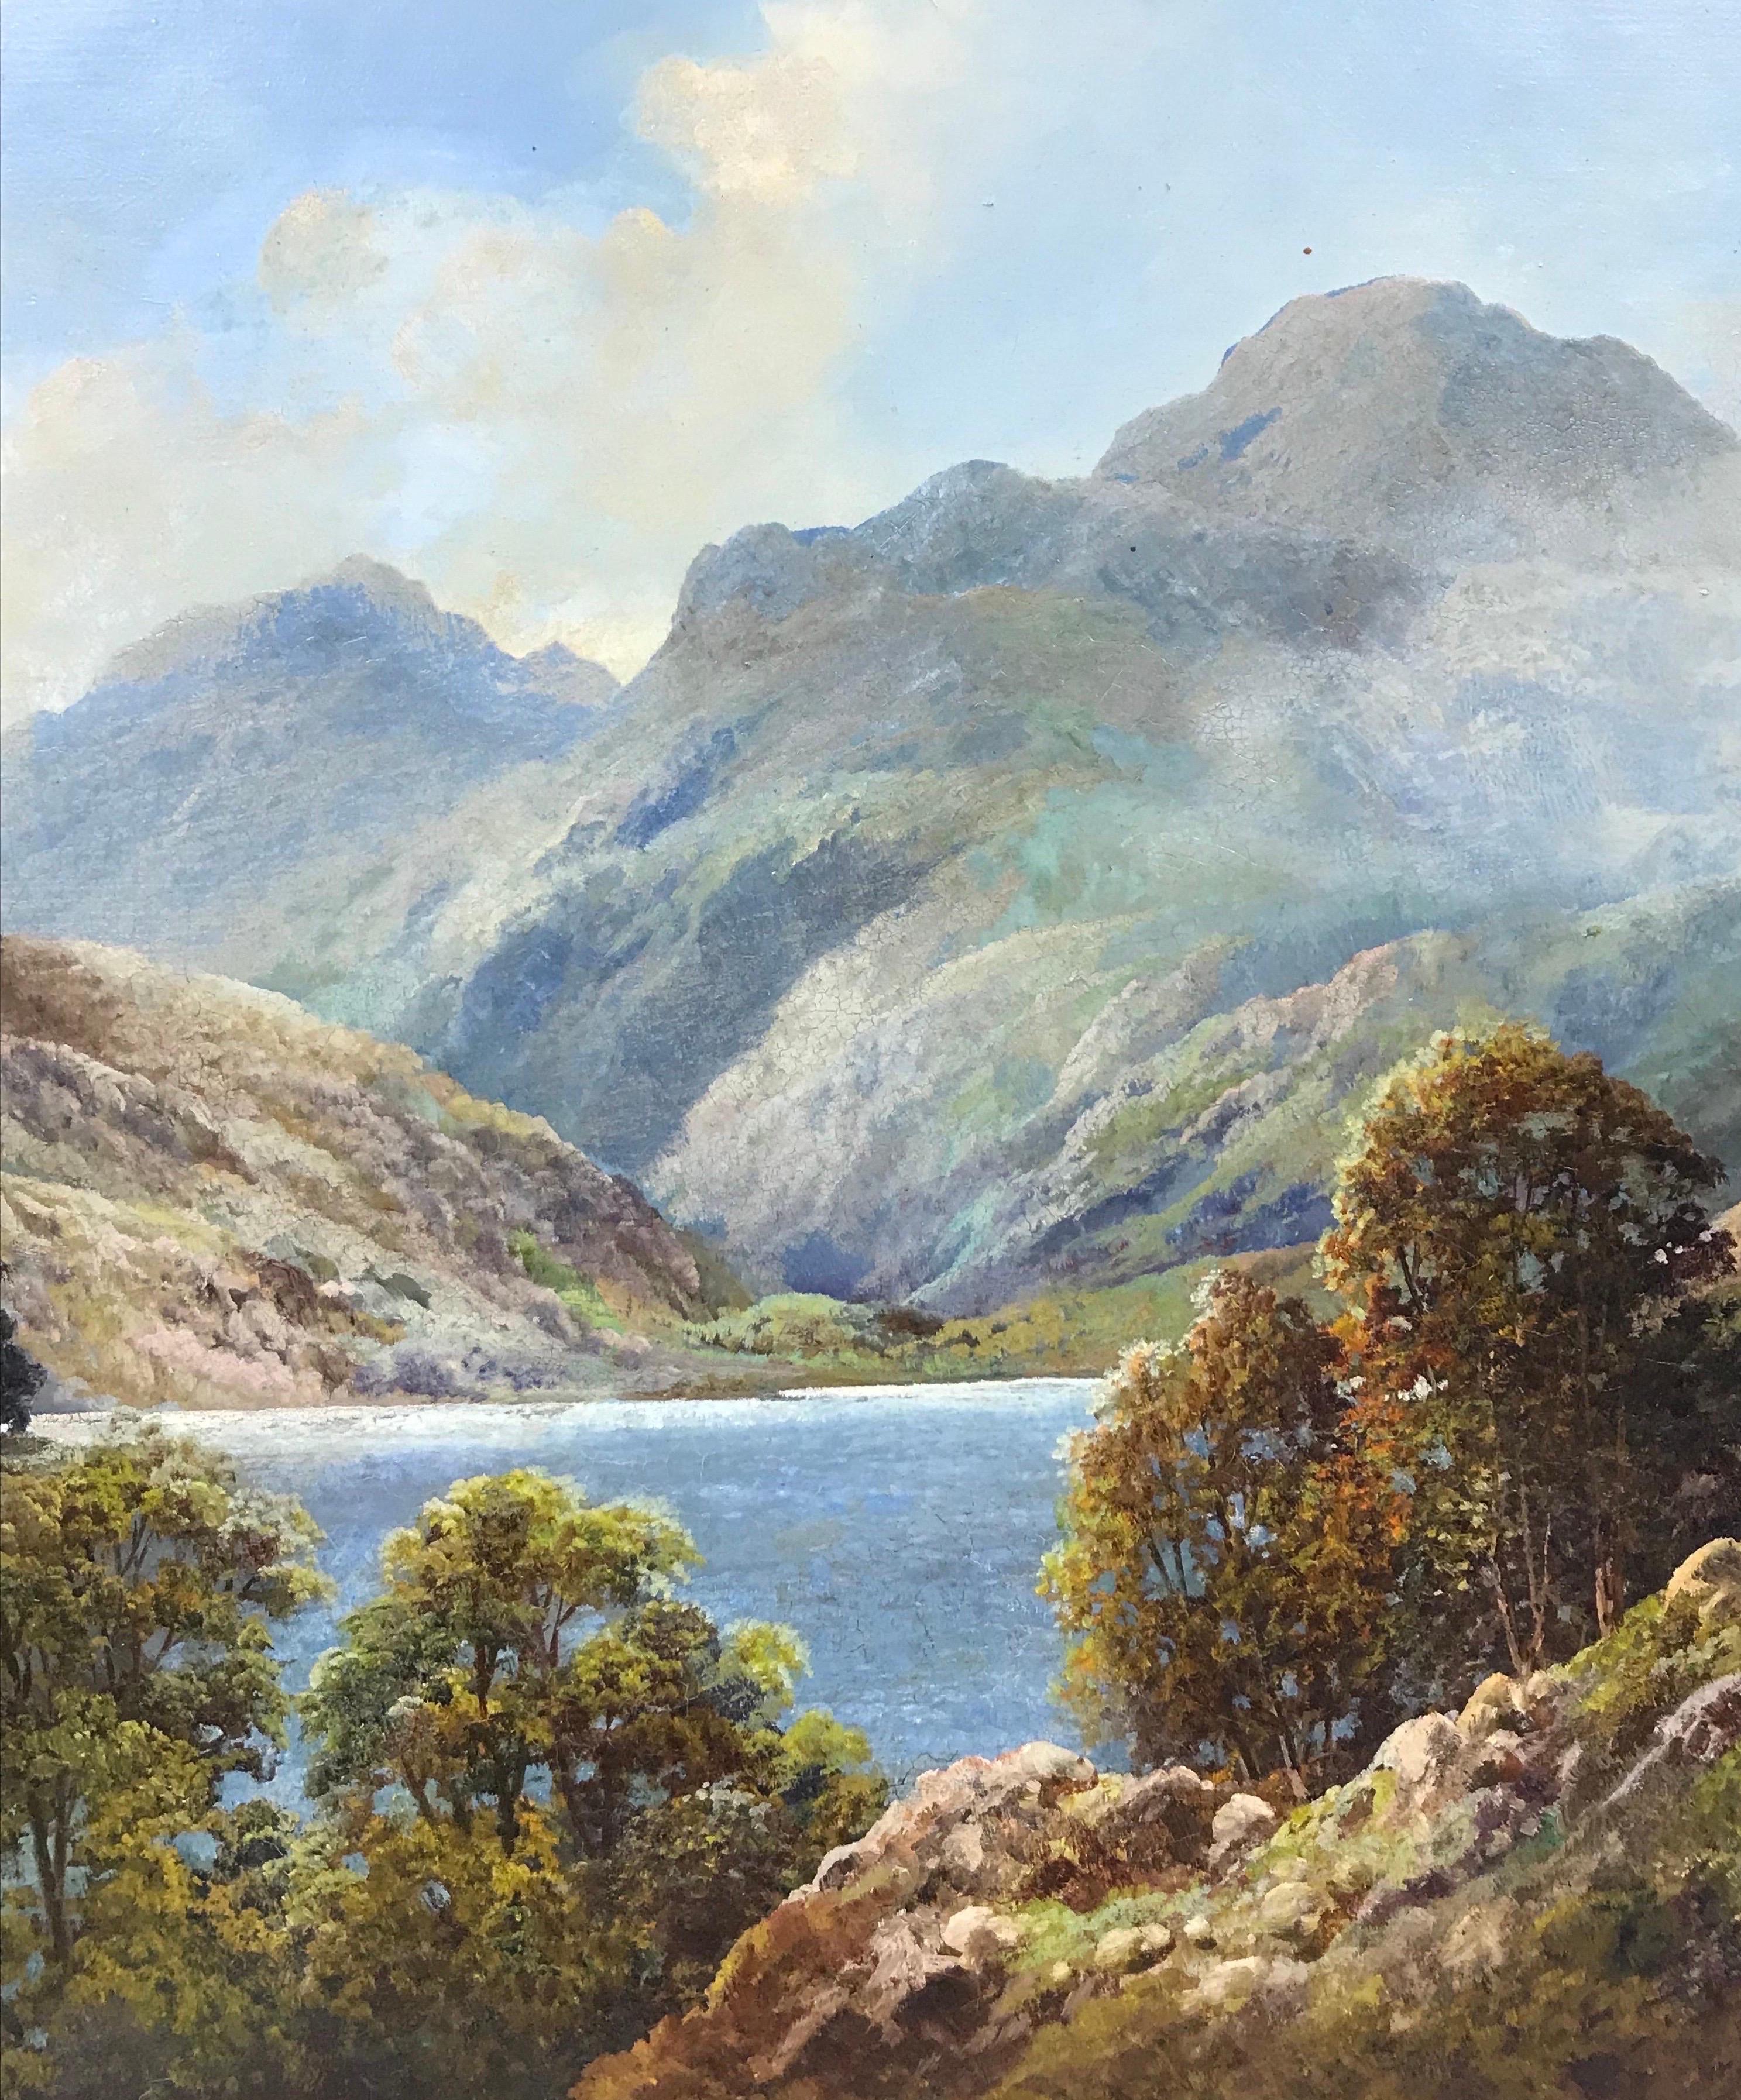 Artist/ School: signed by Douglas Falconer (British, 1913-2004)

Title: North Scotland

Medium: oil on board, framed and inscribed verso

Framed: 14 x 20 inches
Board: 12 x 18 inches

Provenance: private collection, England

Condition: The painting